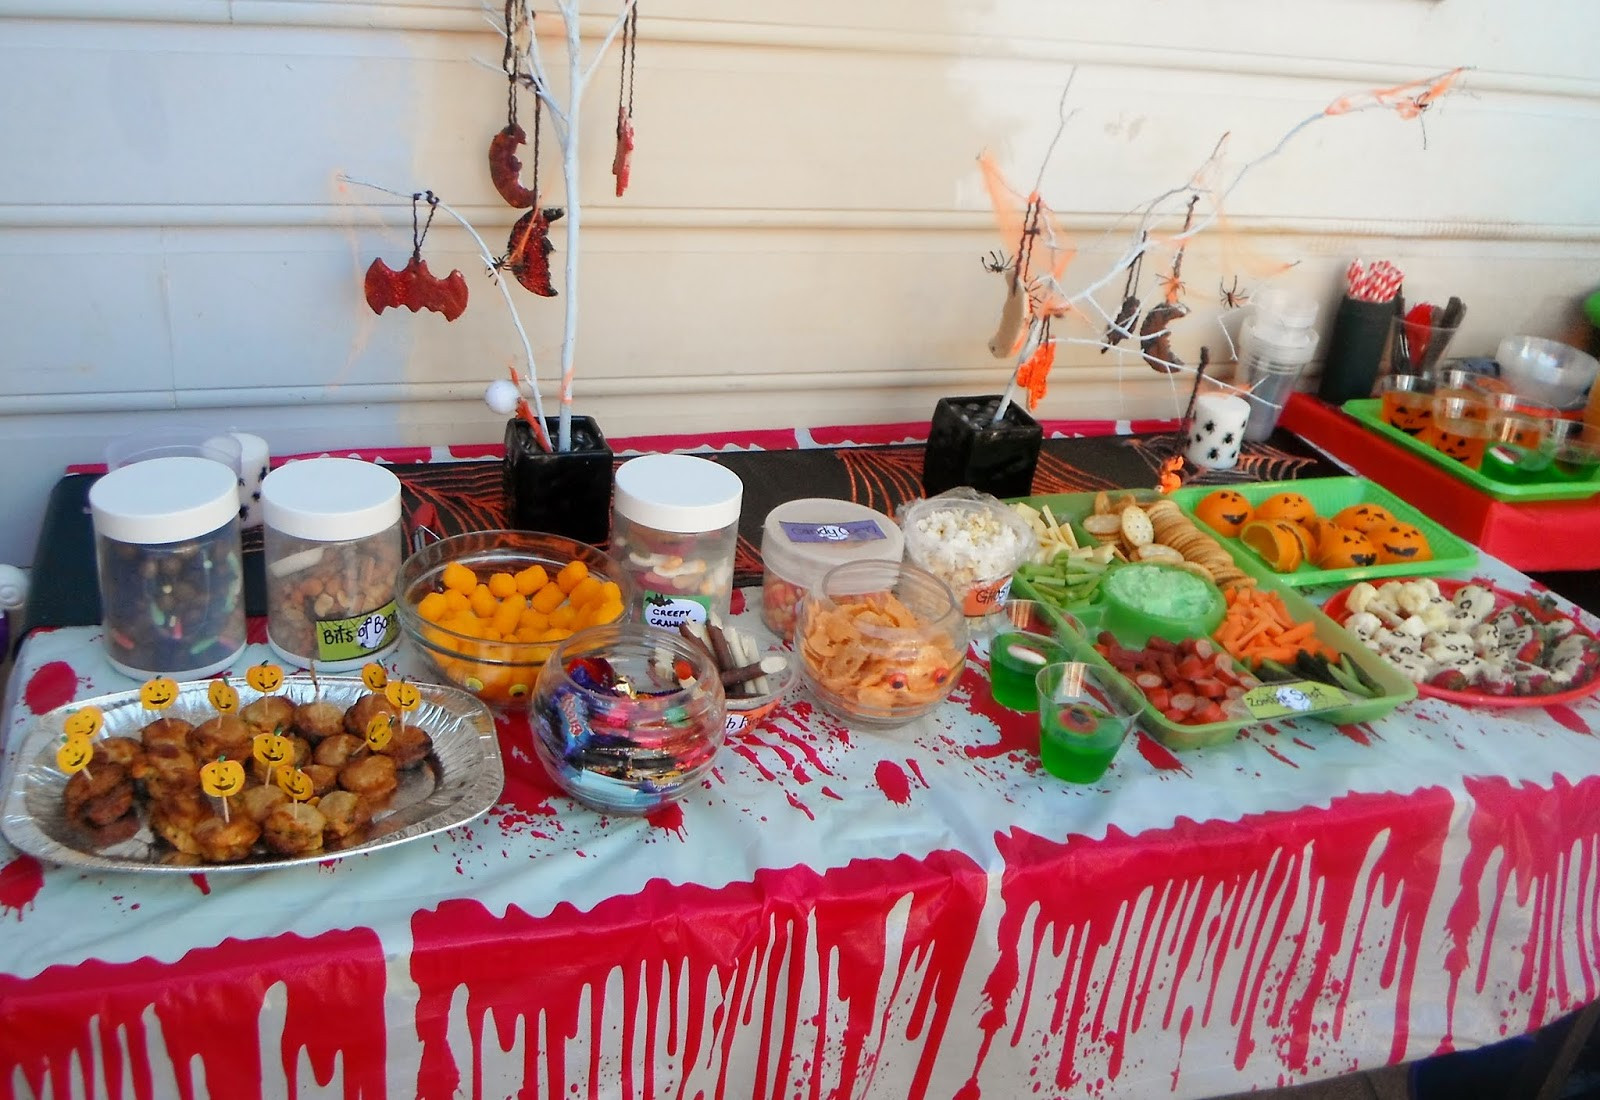 Halloween Party Food Ideas For Kids
 Adventures at home with Mum Halloween Party Food